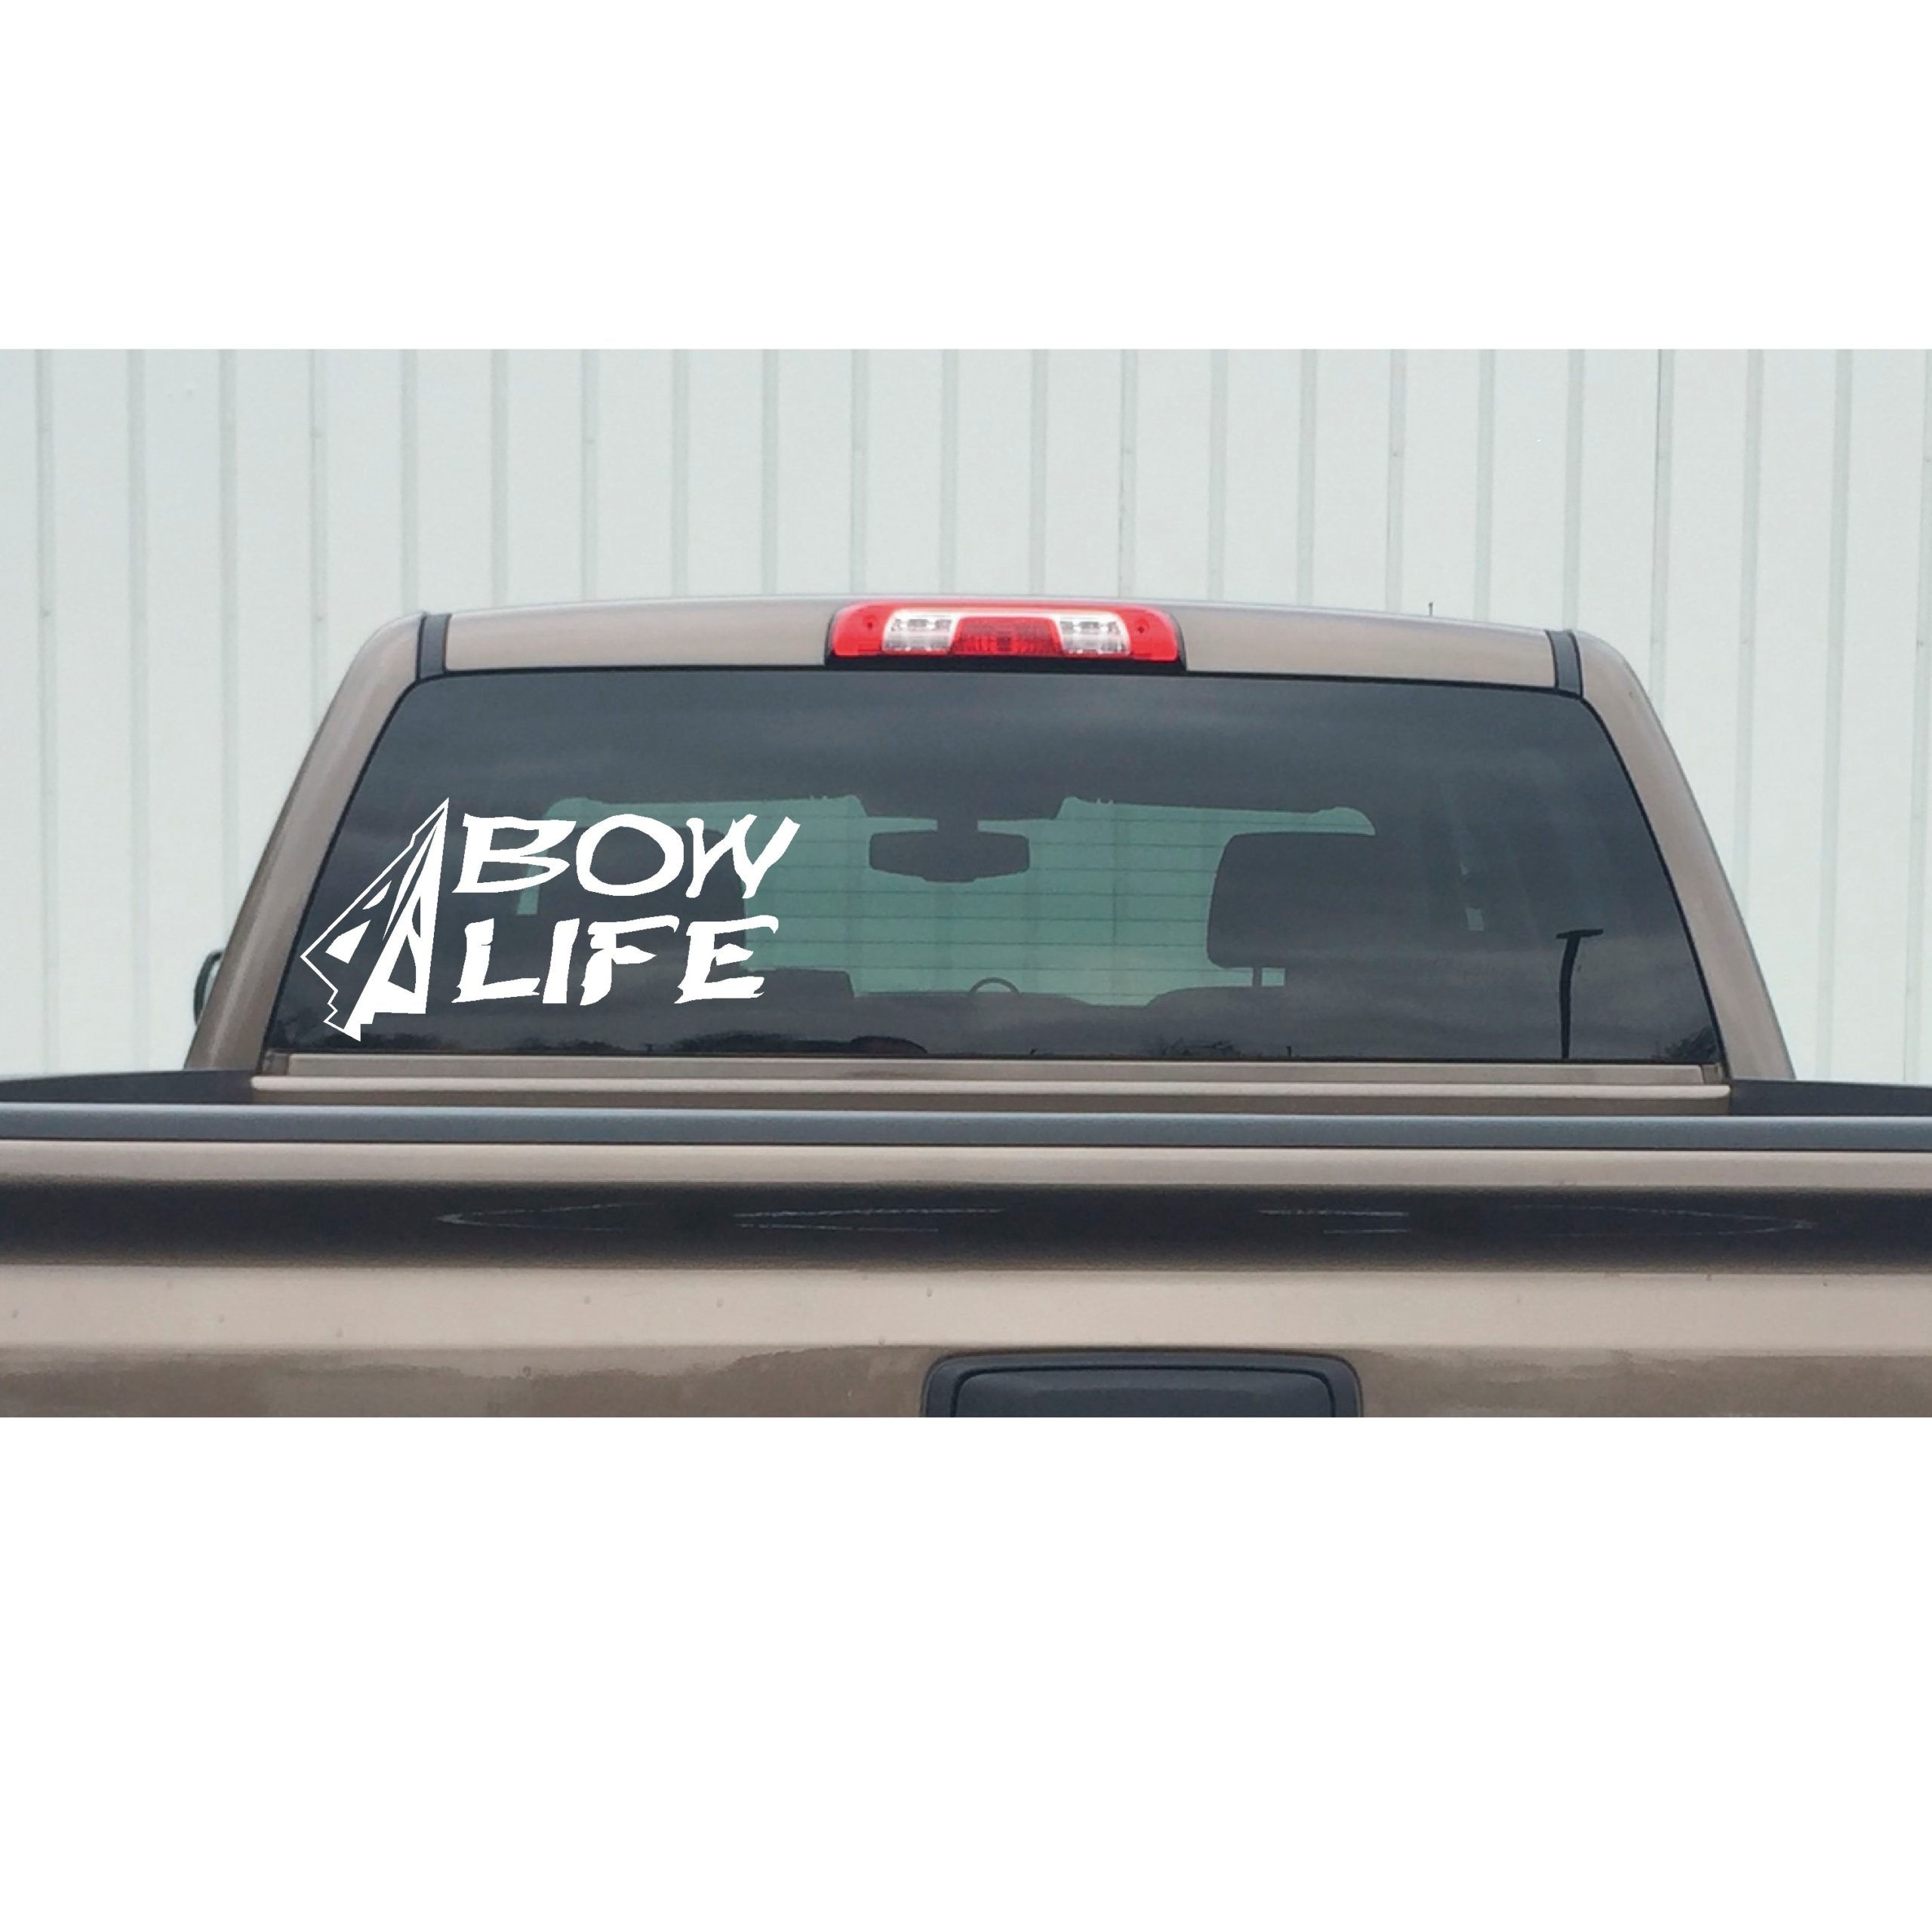 Bow Life Decal Bowhunting Decal Sticker 